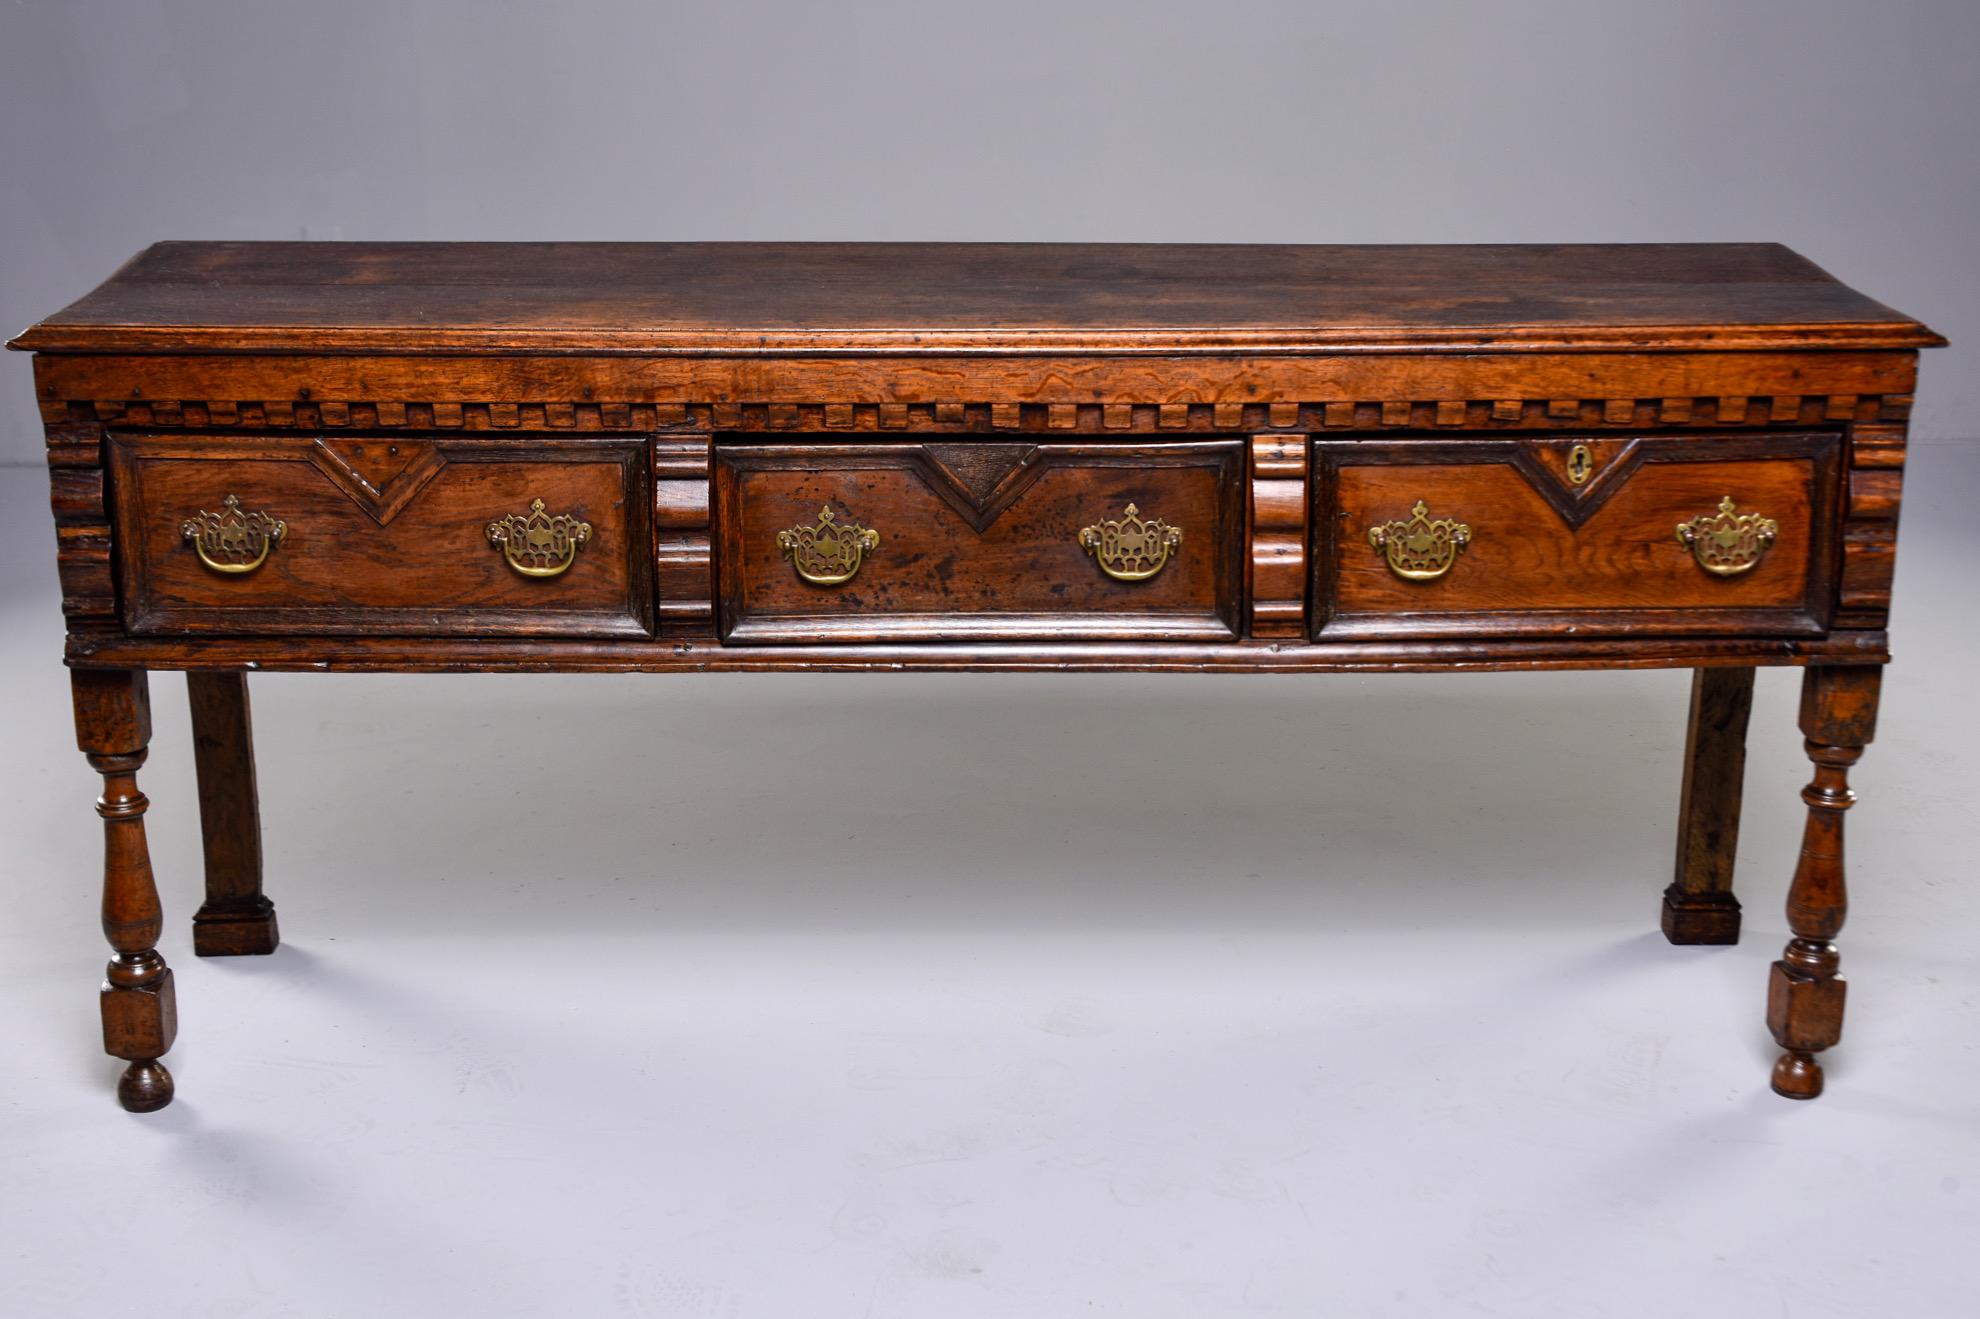 Circa 1820s Spanish baroque table in walnut features carved details, turned front legs and three functional drawers with fancy brass hardware. Unknown maker.